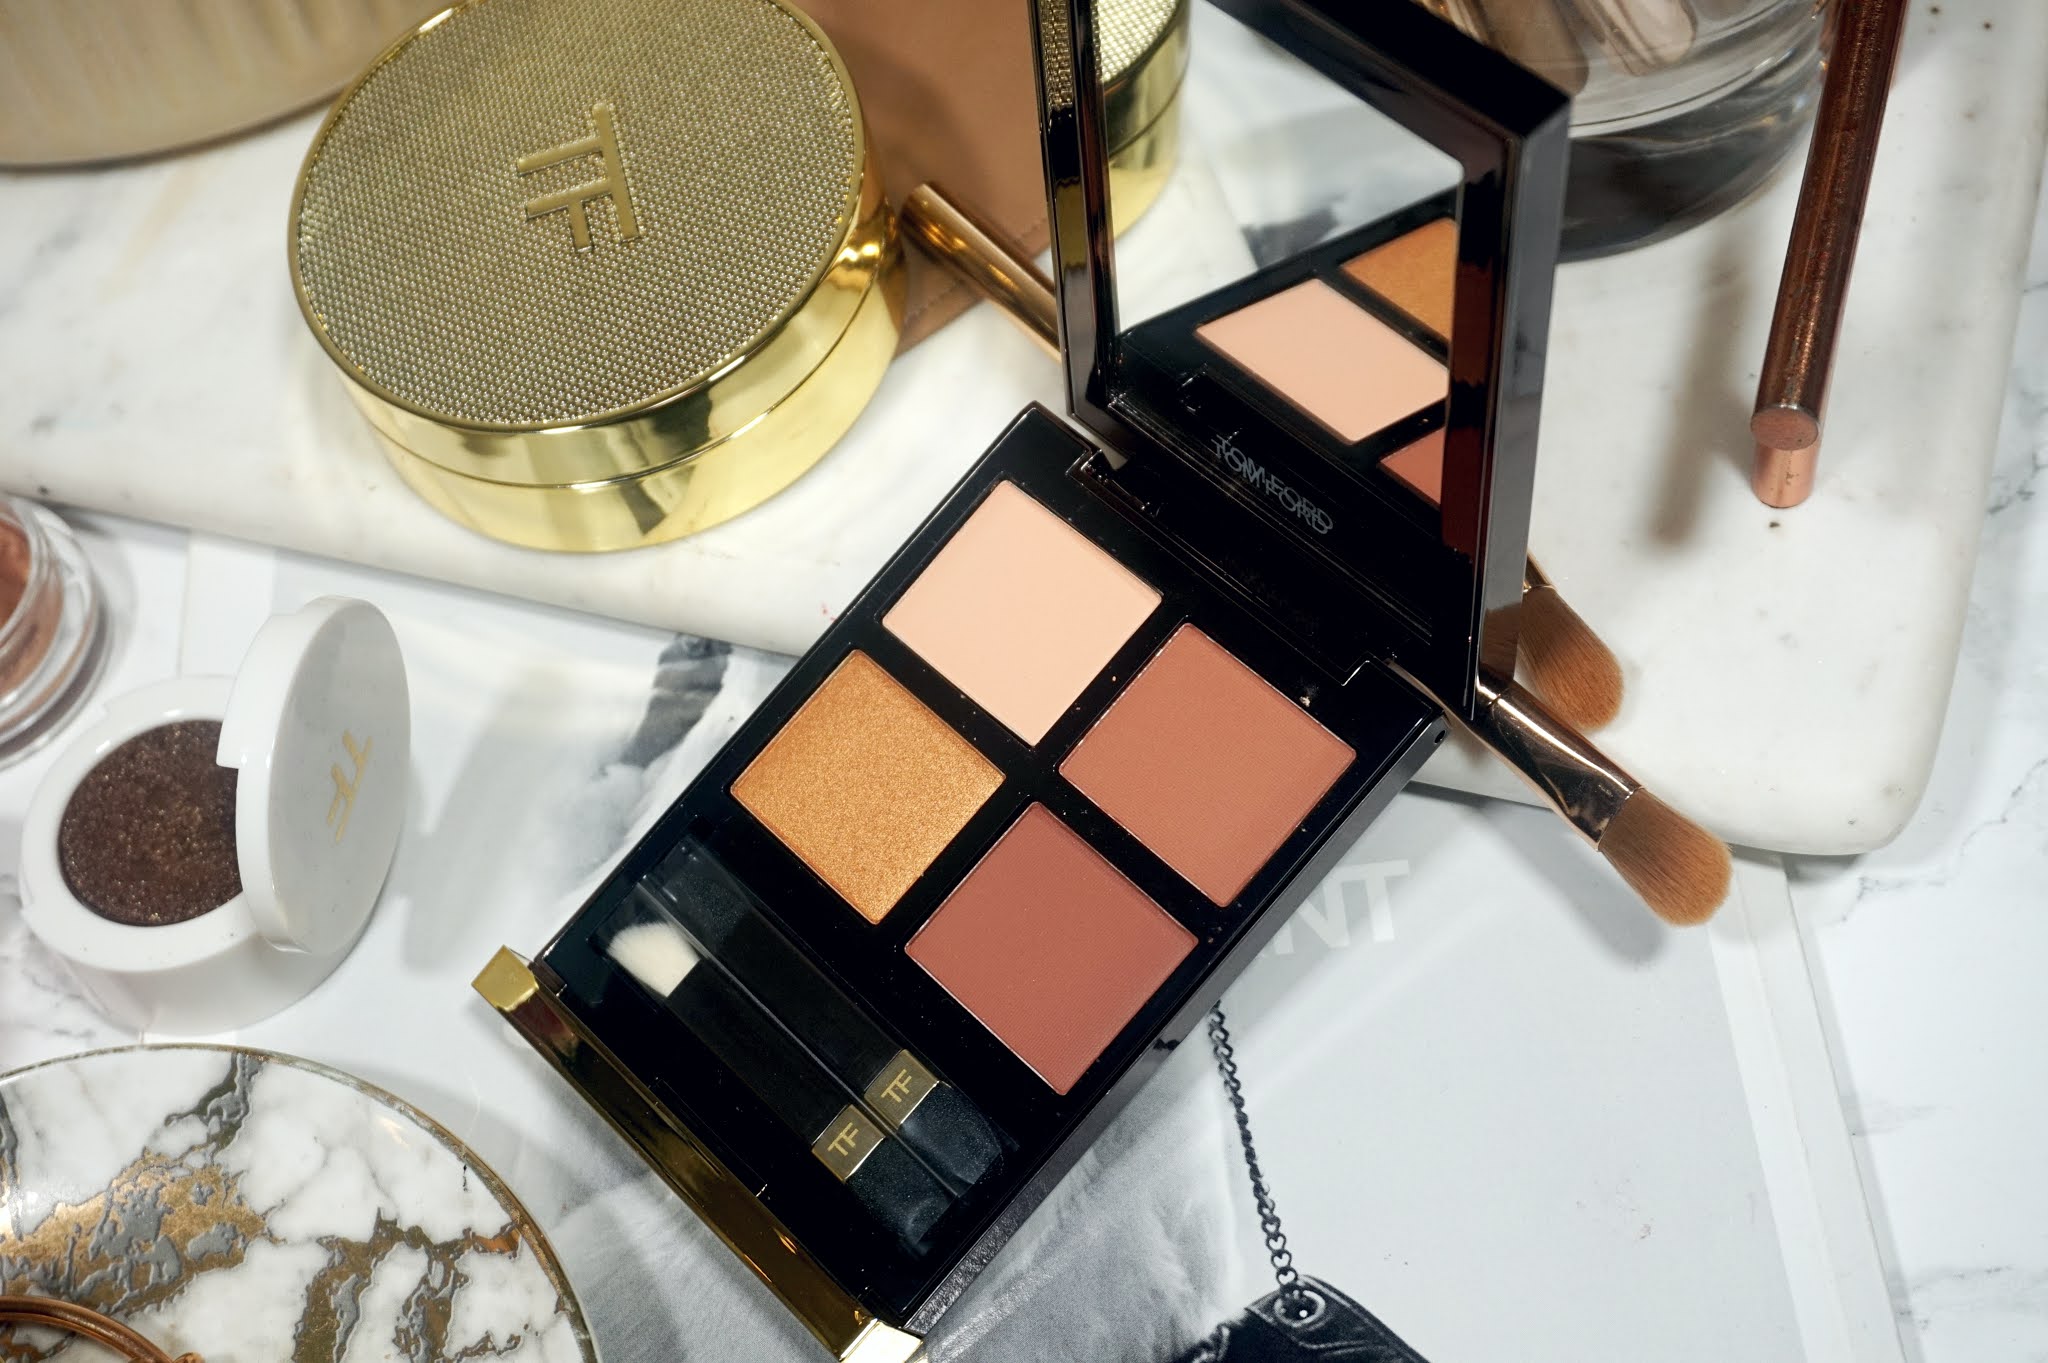 Tom Ford Desert Fox Eye Color Quad Review and Swatches